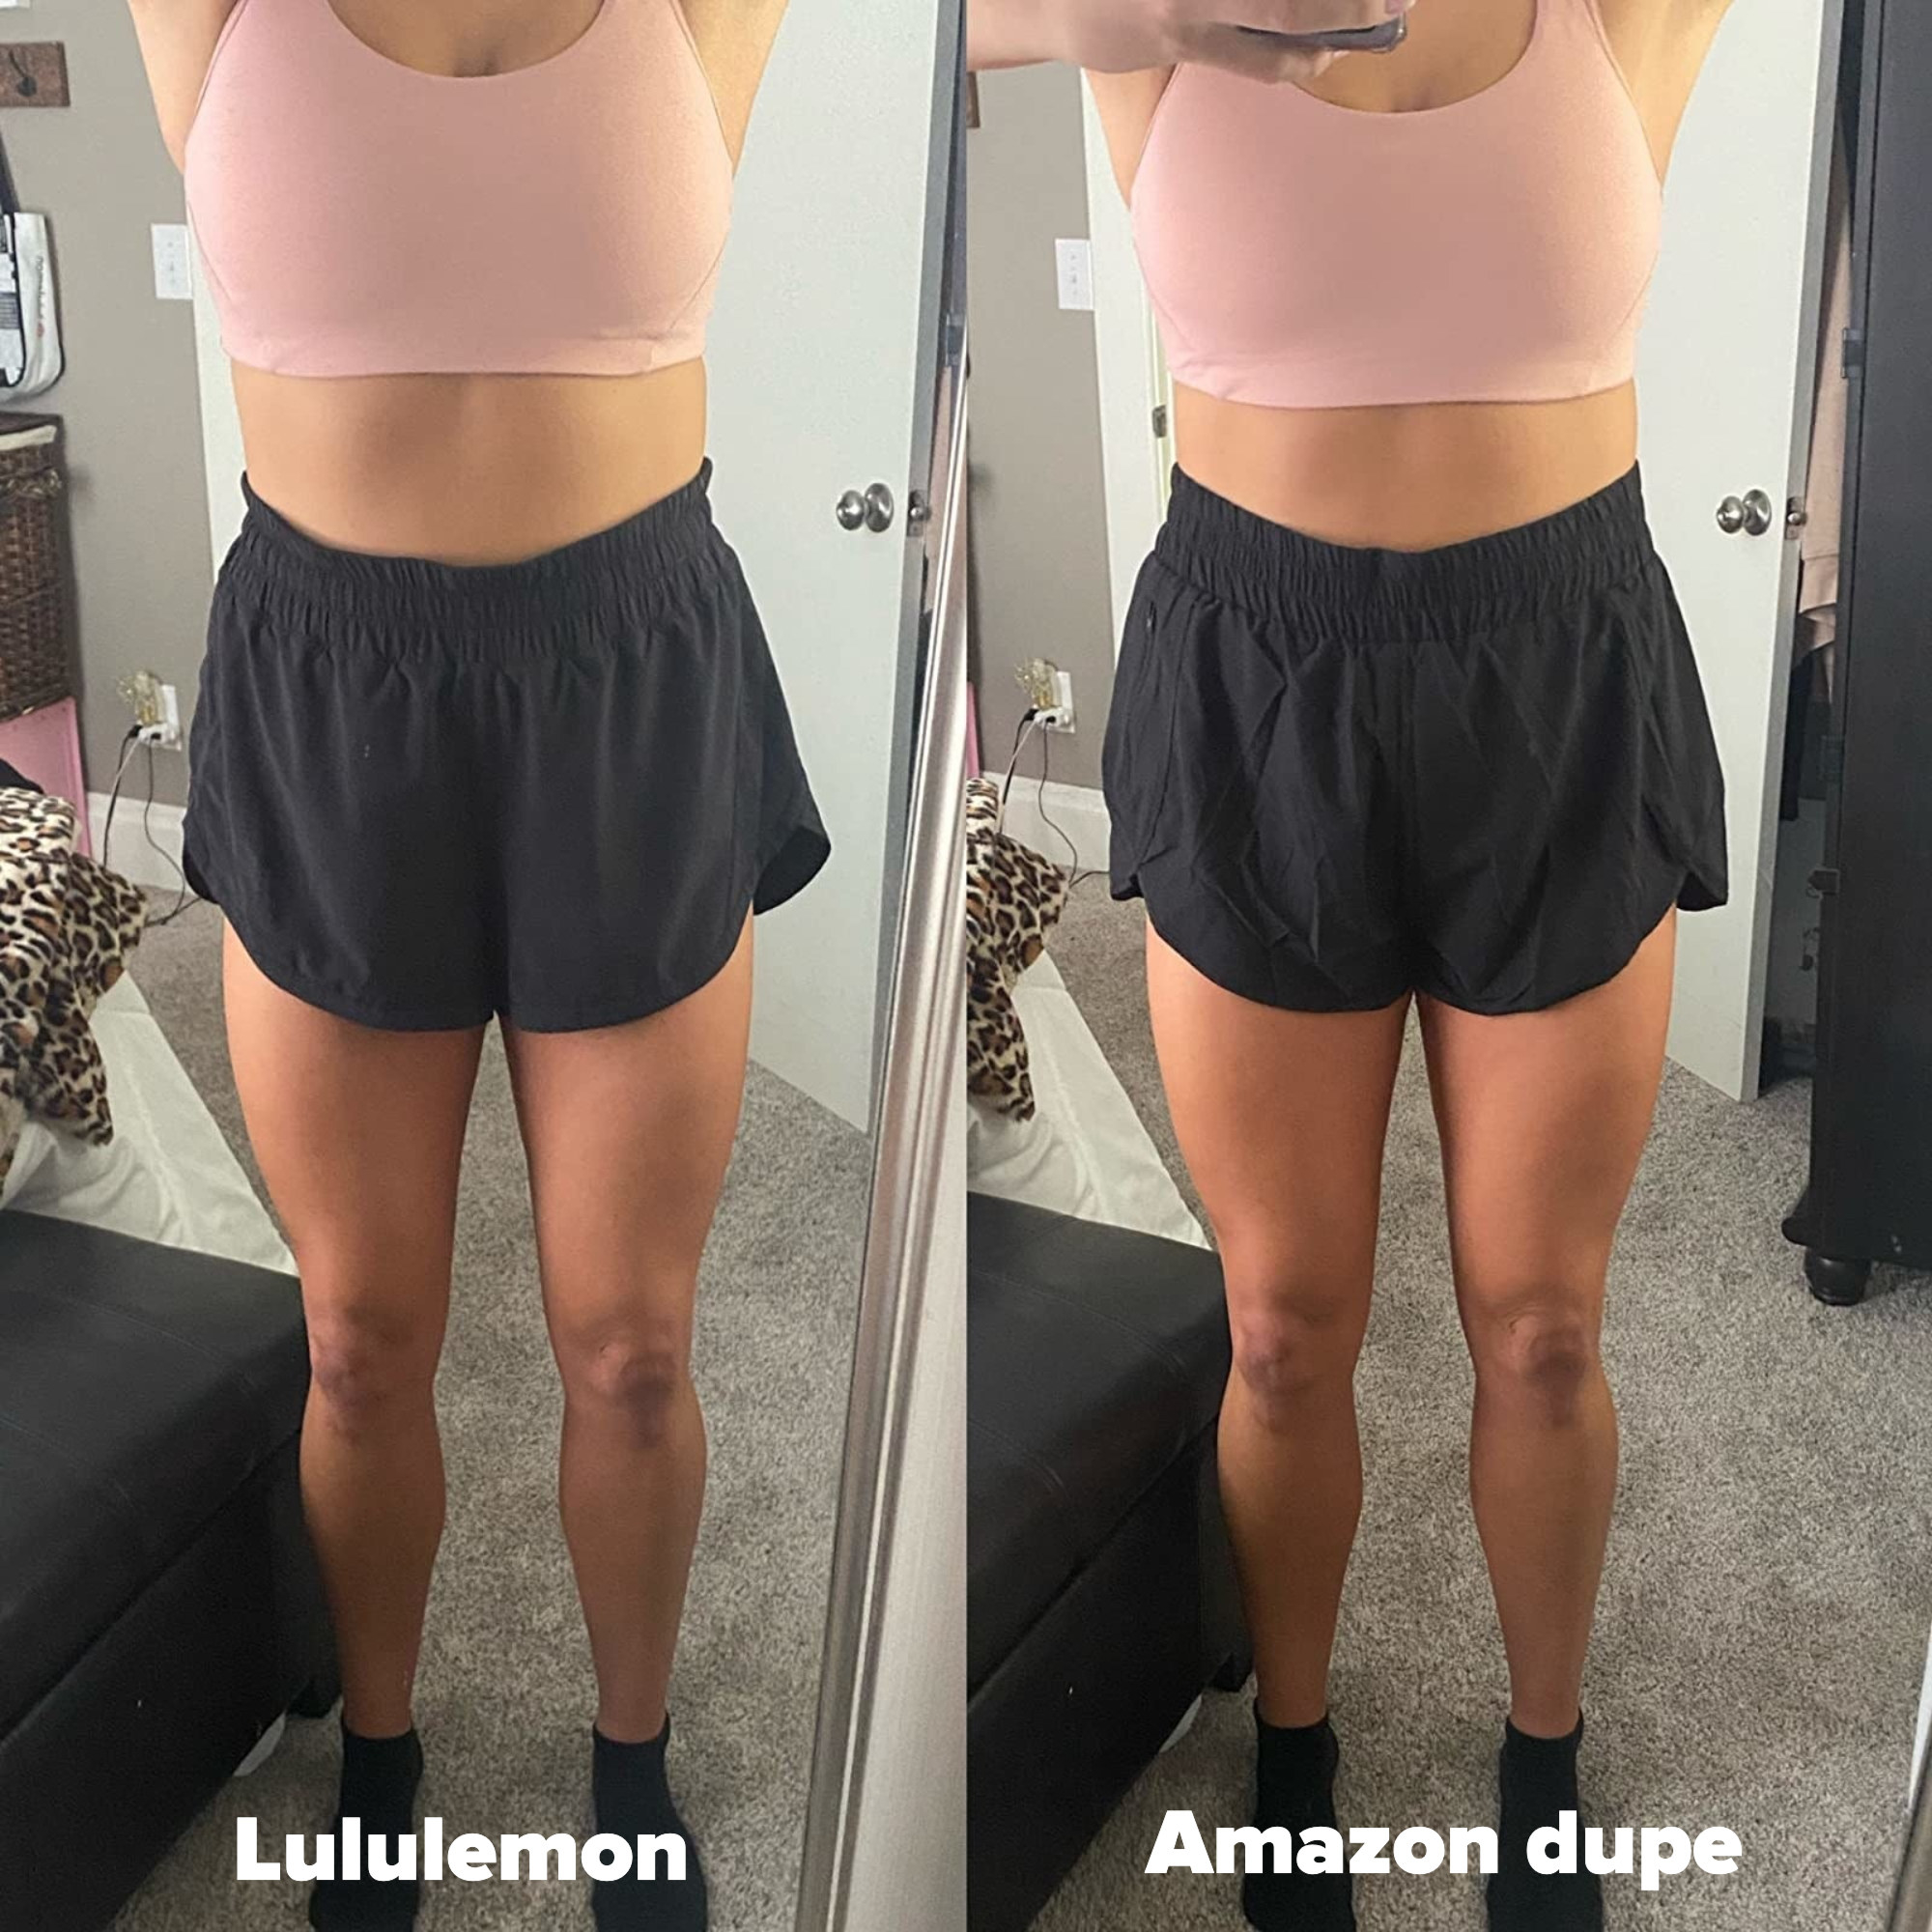 Reviewer&#x27;s side by side showing lululemon high waisted shorts on left and nearly identical Amazon dupe shorts on the right